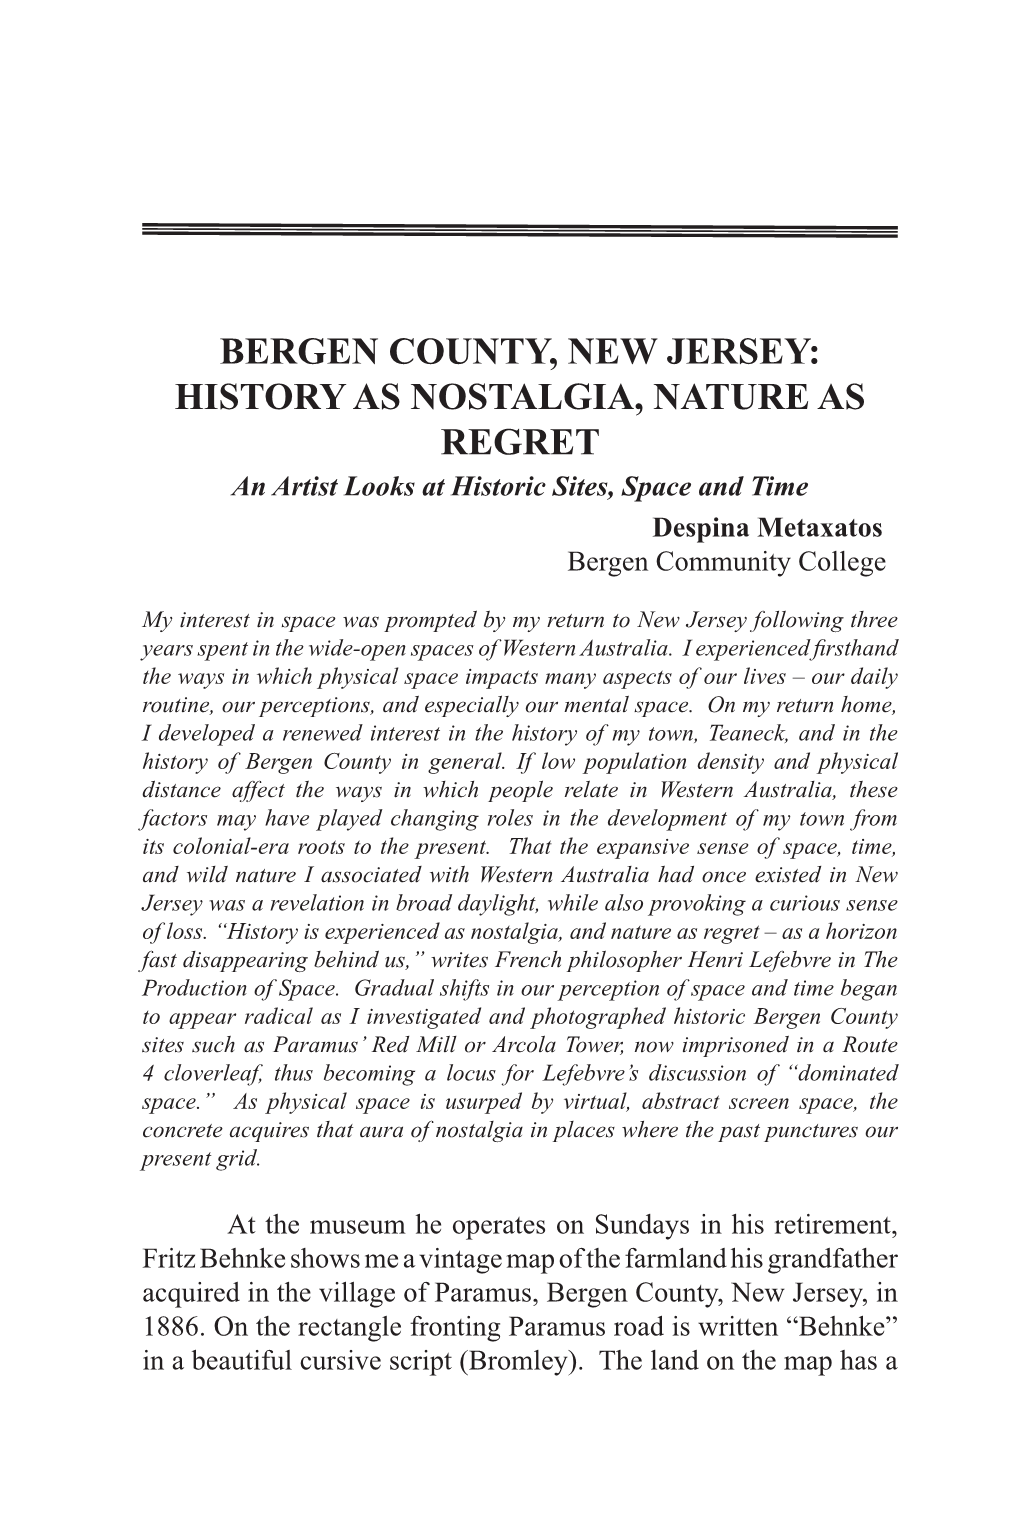 BERGEN COUNTY, NEW JERSEY: HISTORY AS NOSTALGIA, NATURE AS REGRET an Artist Looks at Historic Sites, Space and Time Despina Metaxatos Bergen Community College